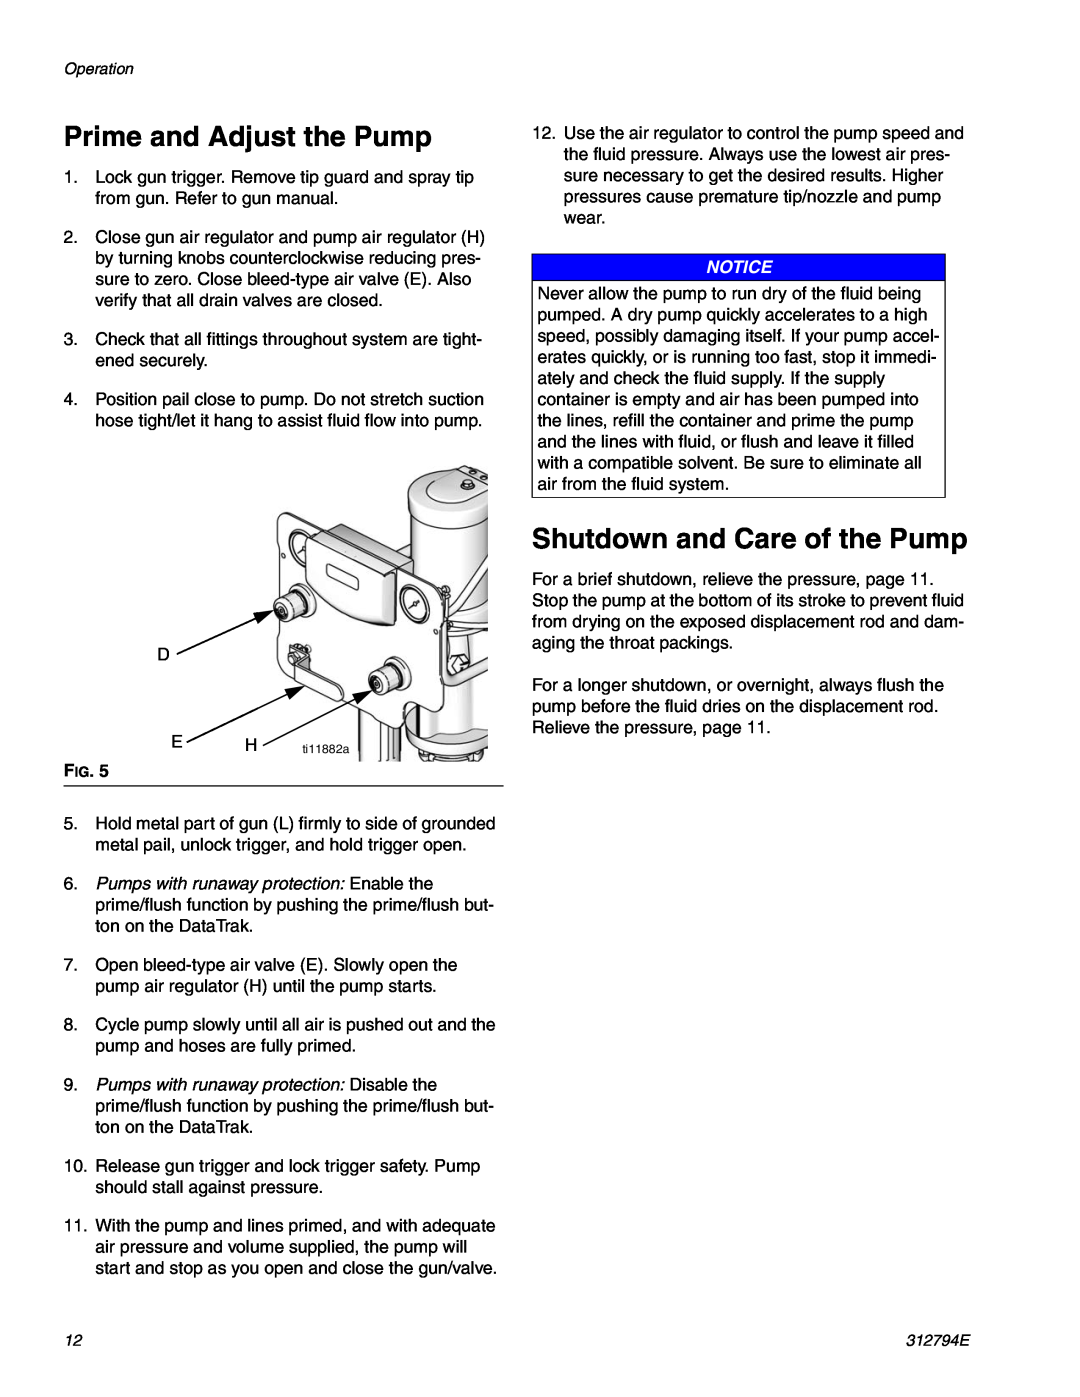 Graco 312794E important safety instructions Prime and Adjust the Pump, Shutdown and Care of the Pump 